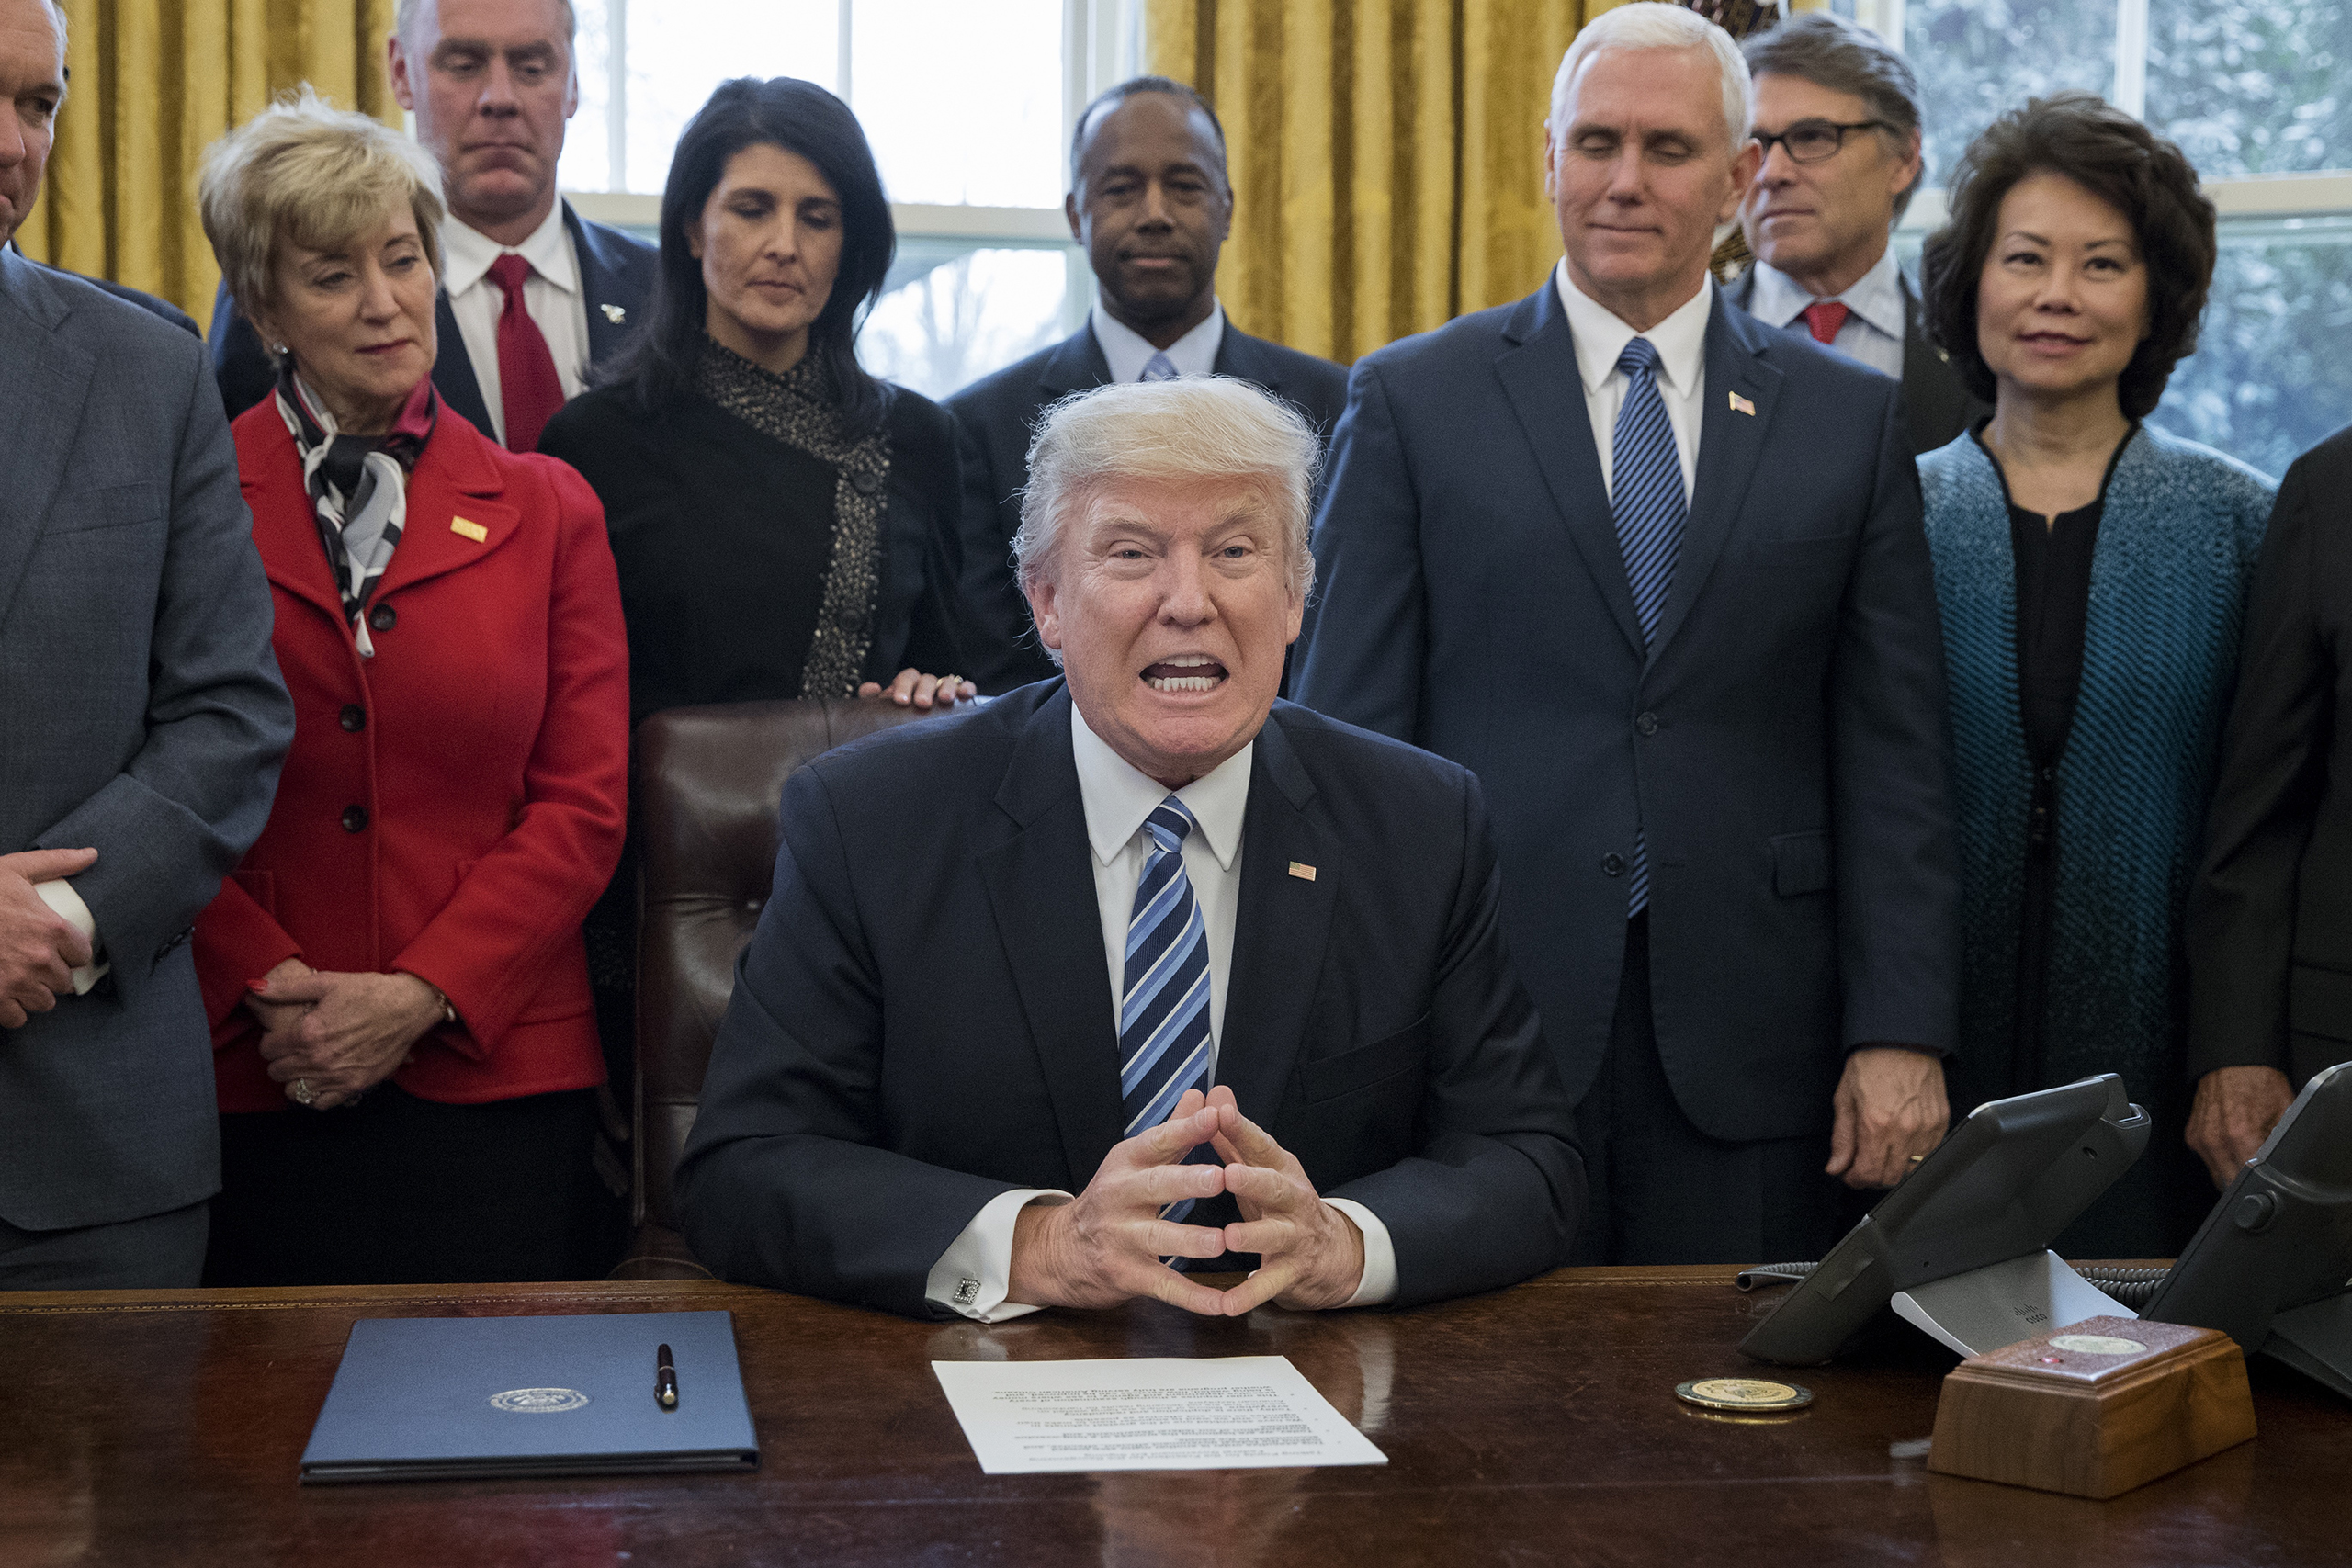 Joined by his Cabinet, Trump signed an Executive Order on March 13 that reorganizes the Executive Branch. (Michael Reynolds—Getty Images)